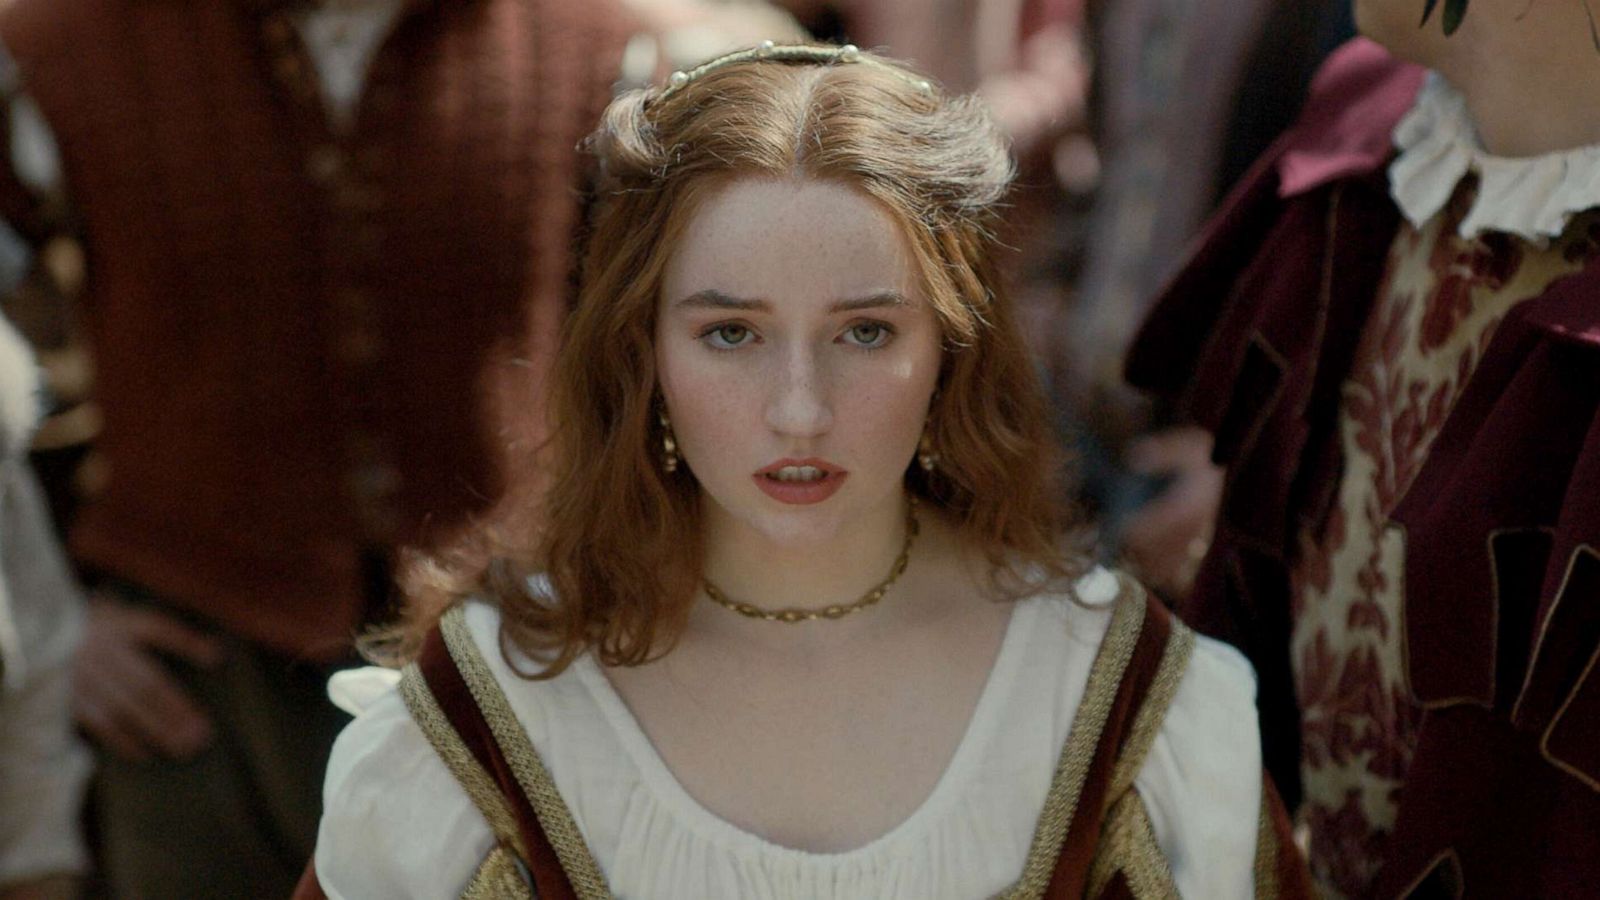 Kaitlyn Dever puts a new spin on Romeo and Juliet's story in